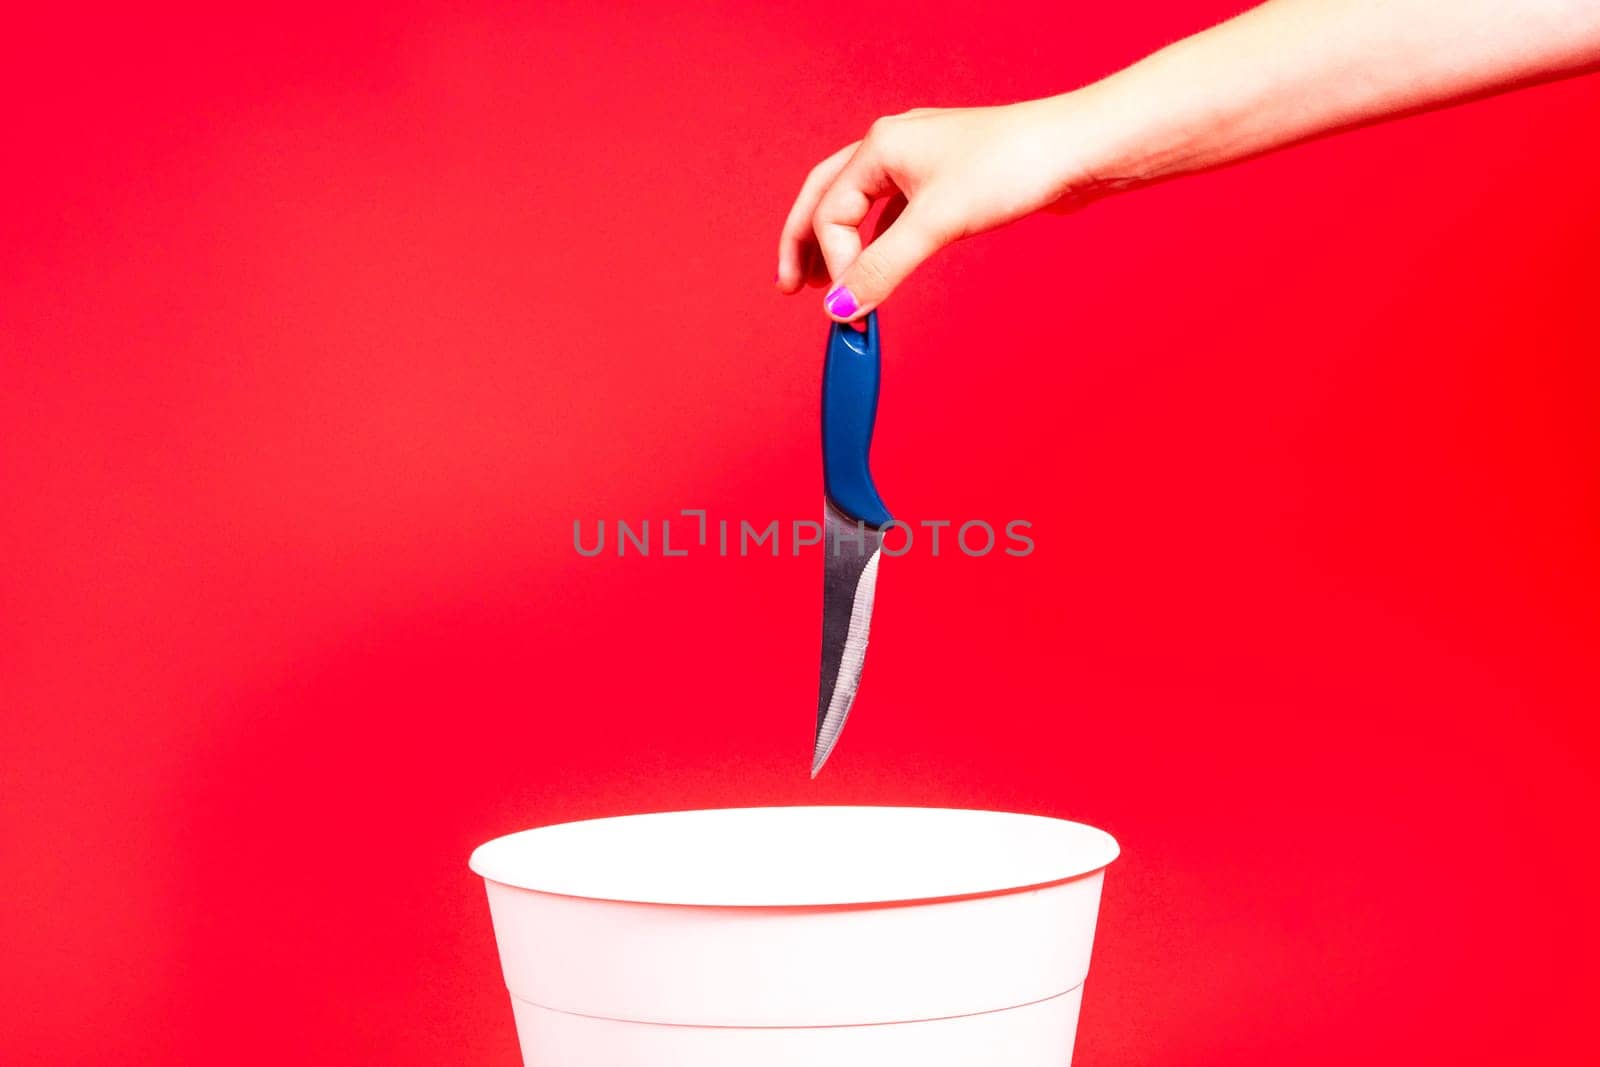 Knife is thrown into the trash basket. Red isolated background